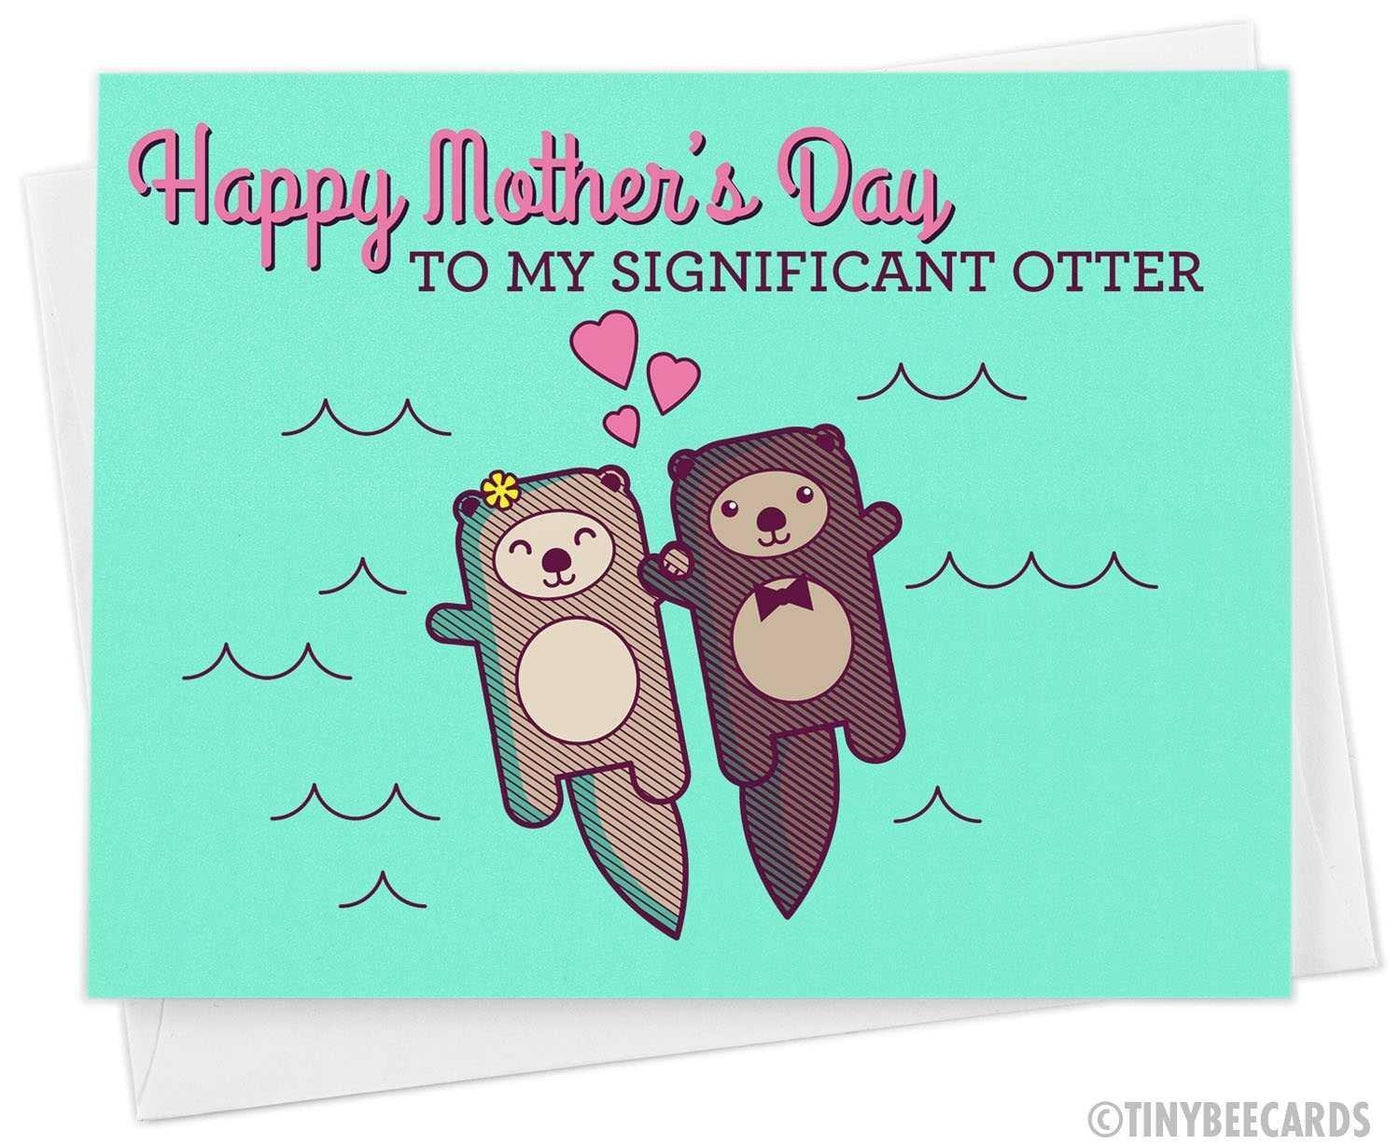 "Happy Mother's Day to my Significant Otter" | Mother's Day Card for Wife - Tiny Bee Cards - The Sock Monster